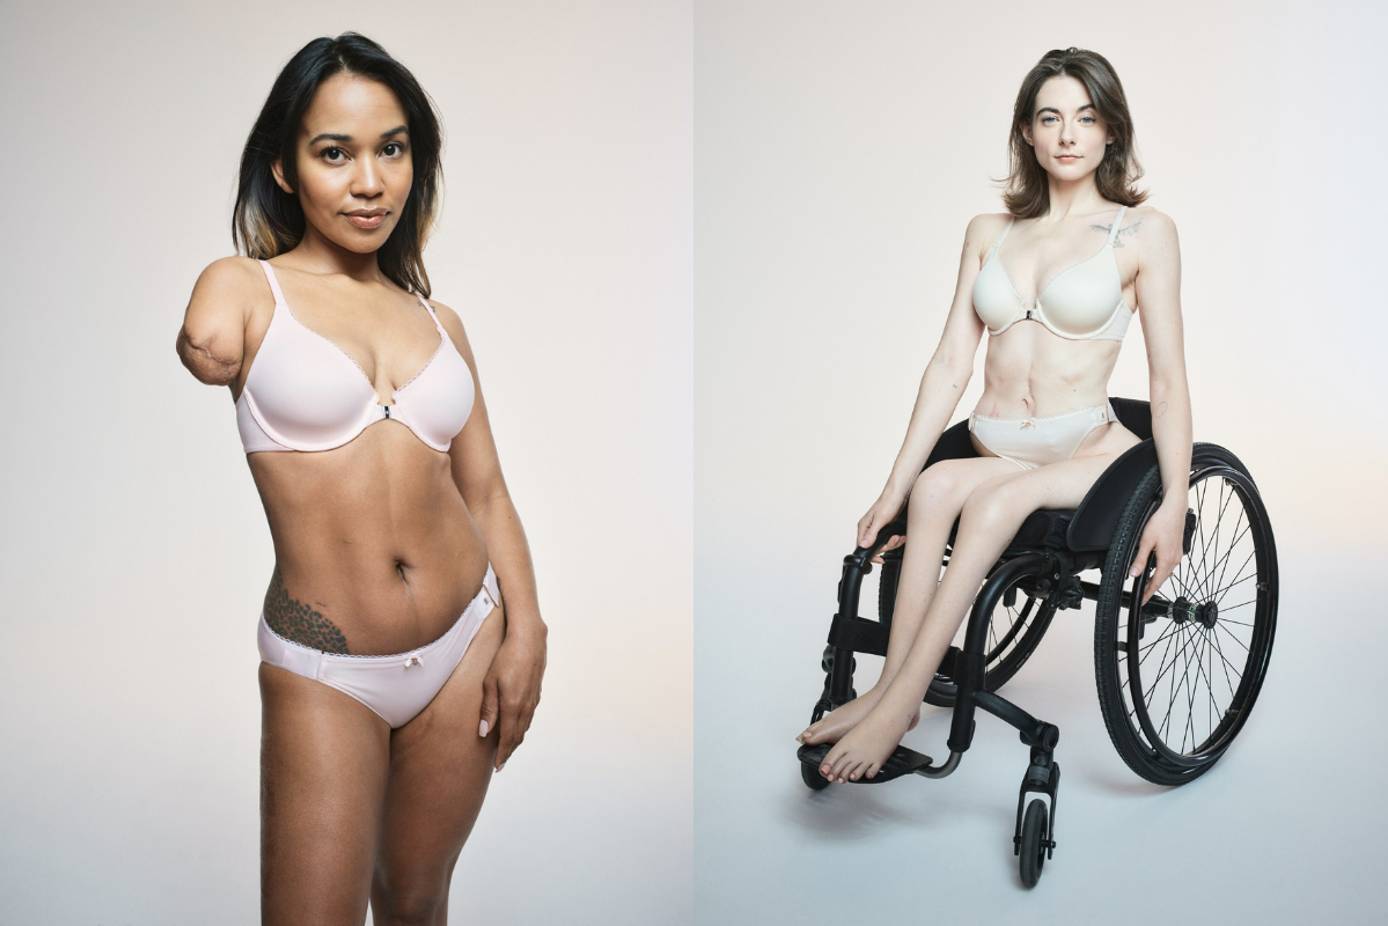 Victoria's Secret debuts collection designed for women with disabilities